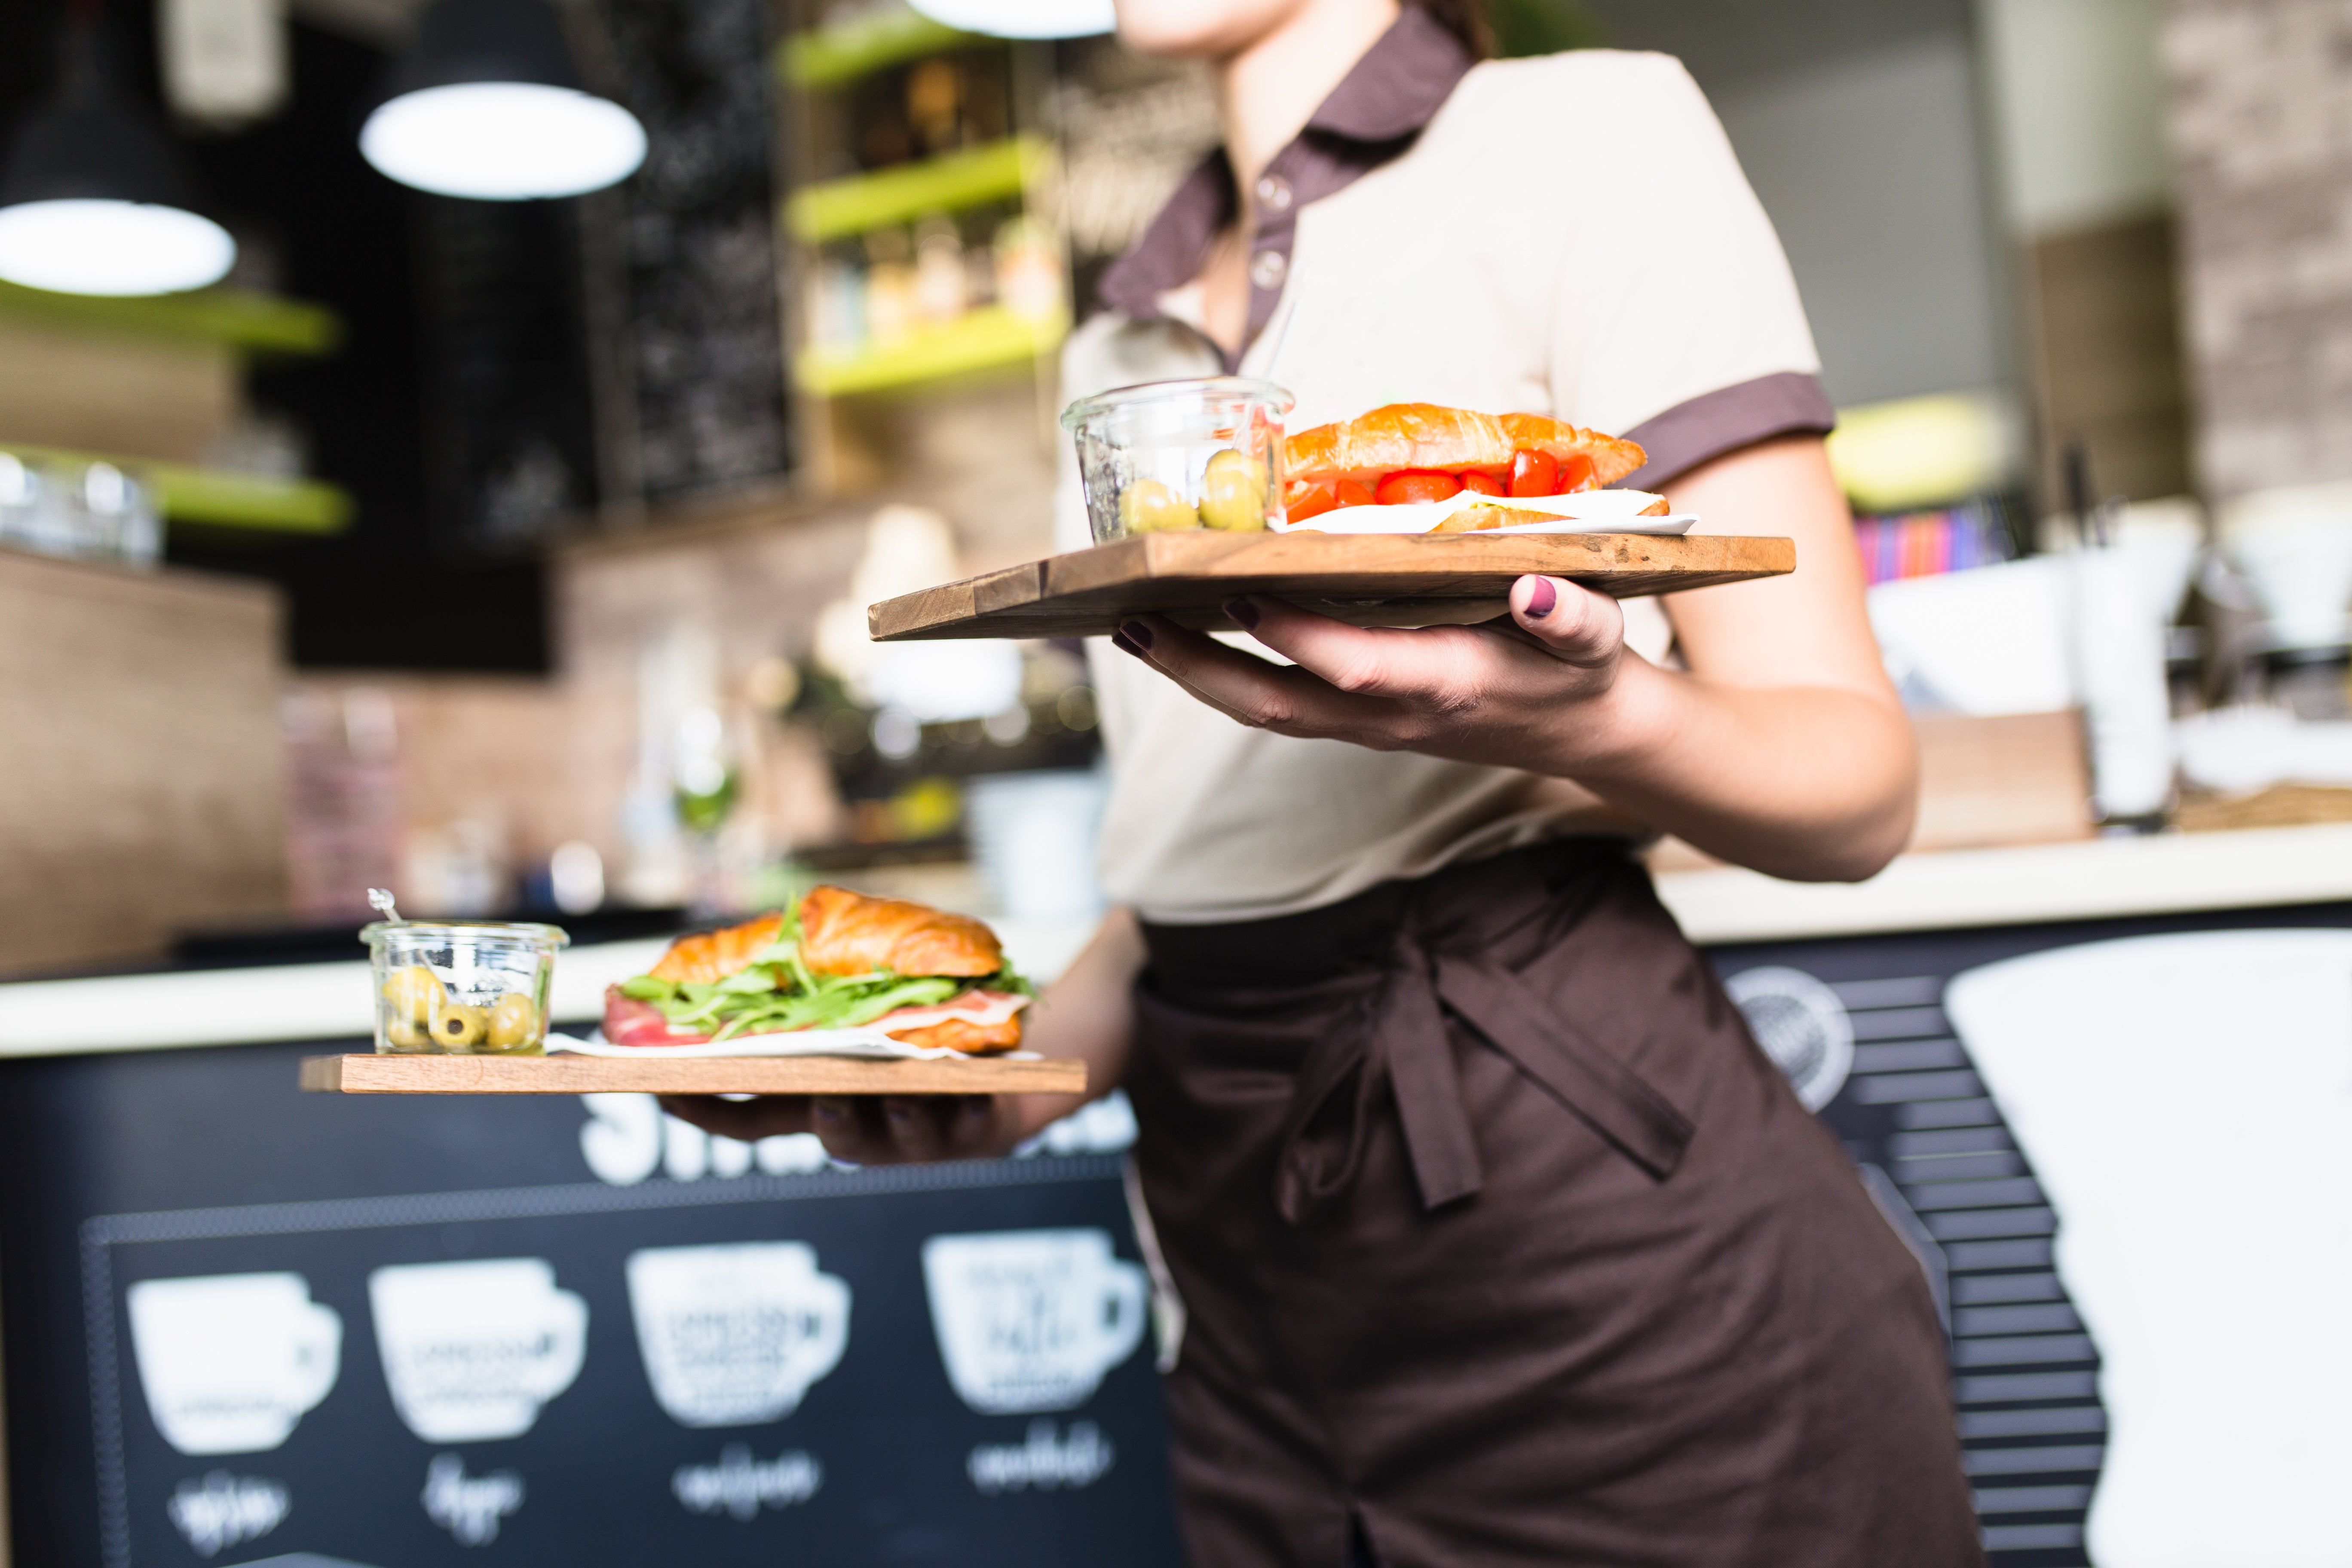 A new survey has underscored the impact of staff shortages on businesses such as restaurants